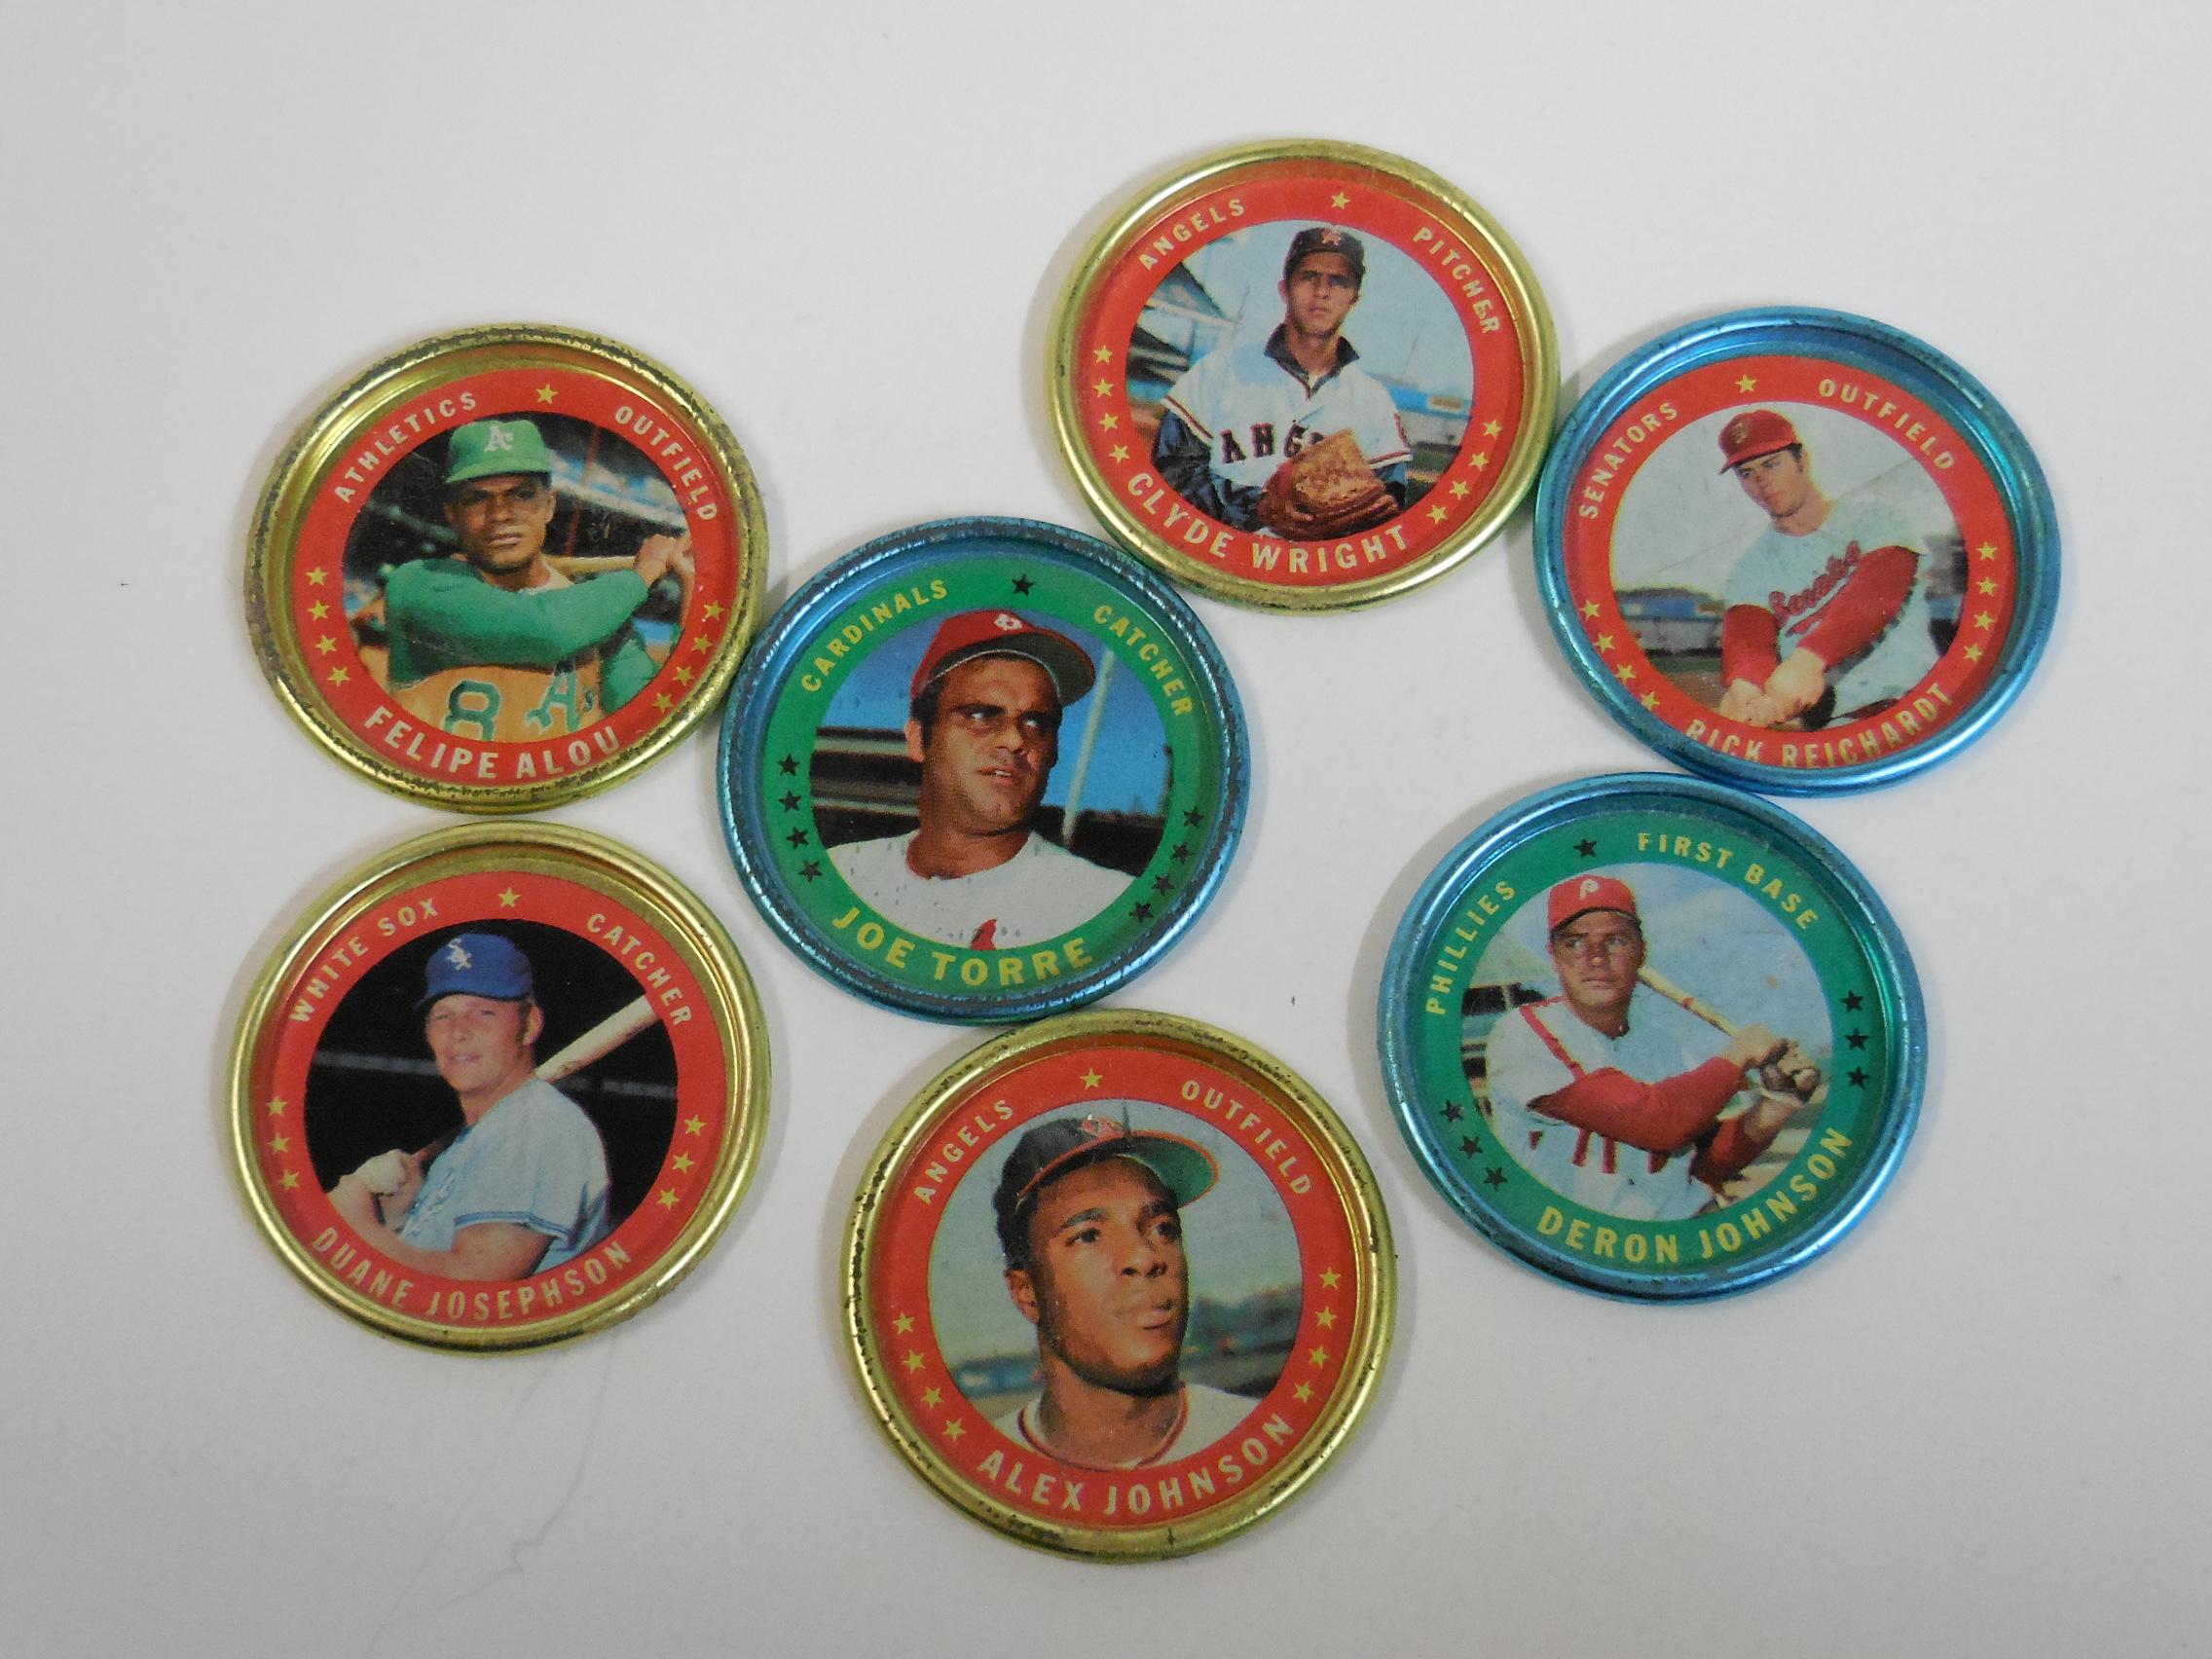 LARGE 1971 TOPPS BASEBALL COINS LOT WITH SOME STARS